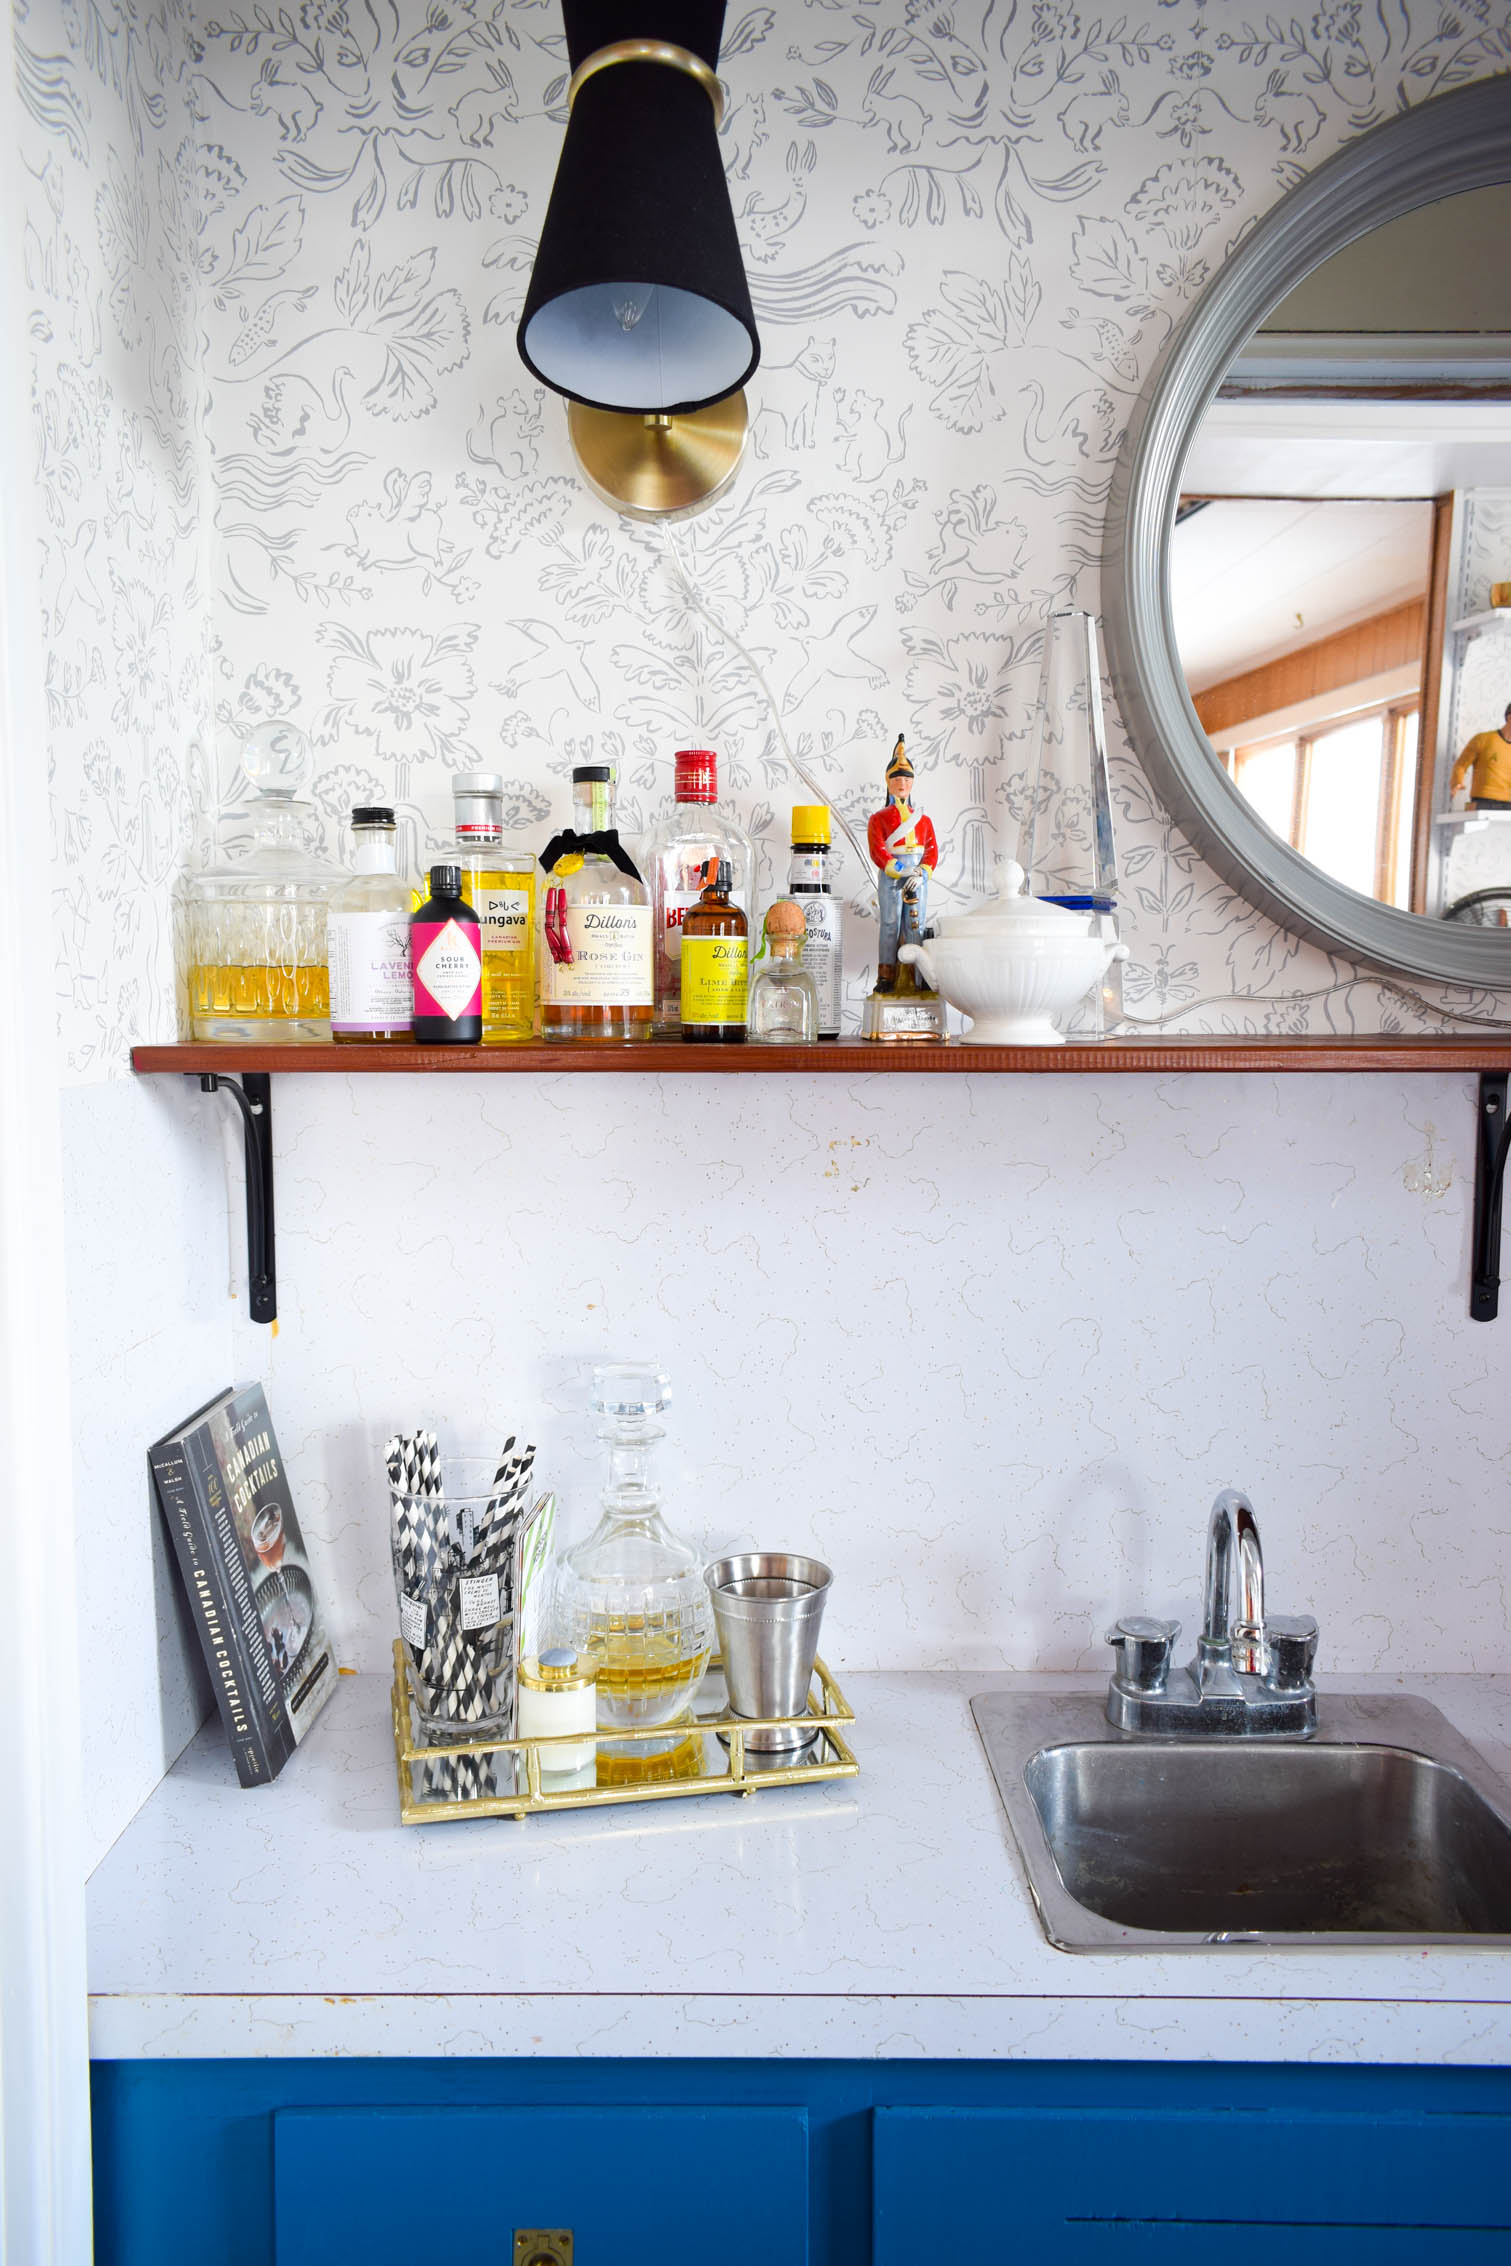 Our basement bar was a nightmare from the 70s, and now it's a clean modern space. With a few budget friendly updates we took it from drab to fab. Freshly painted cabinets, peel and stick floor tiles, and new wallpaper are just what the space needed!